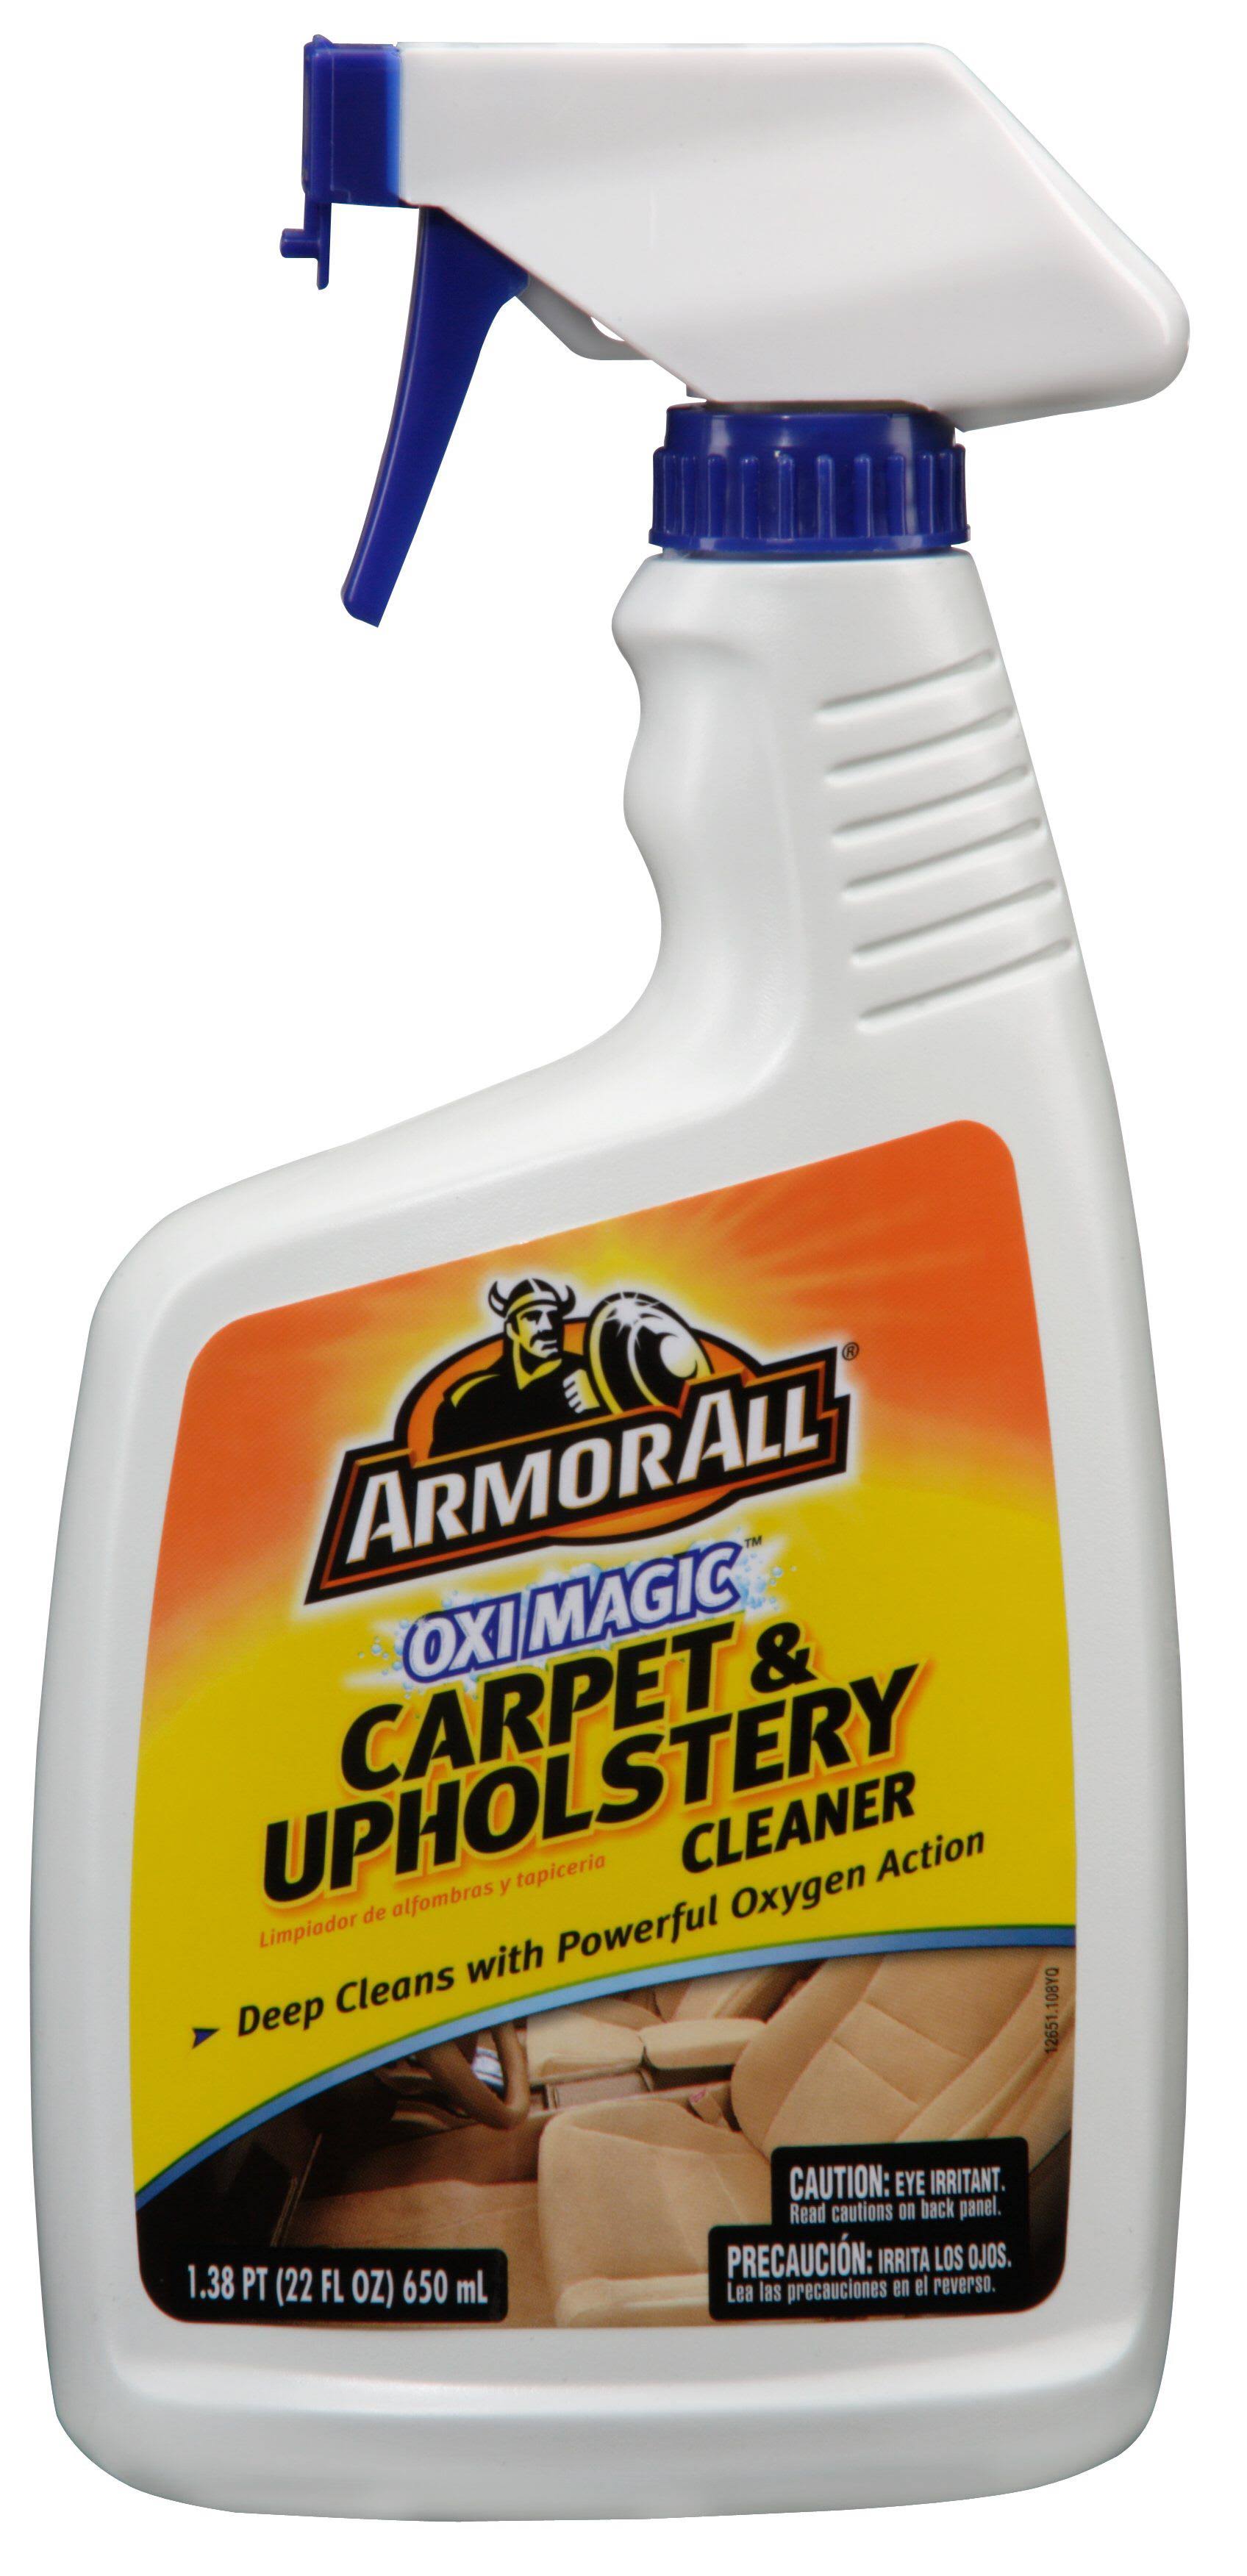 Armor All Oximagic Carpet and Upholstery Cleaner - 22oz